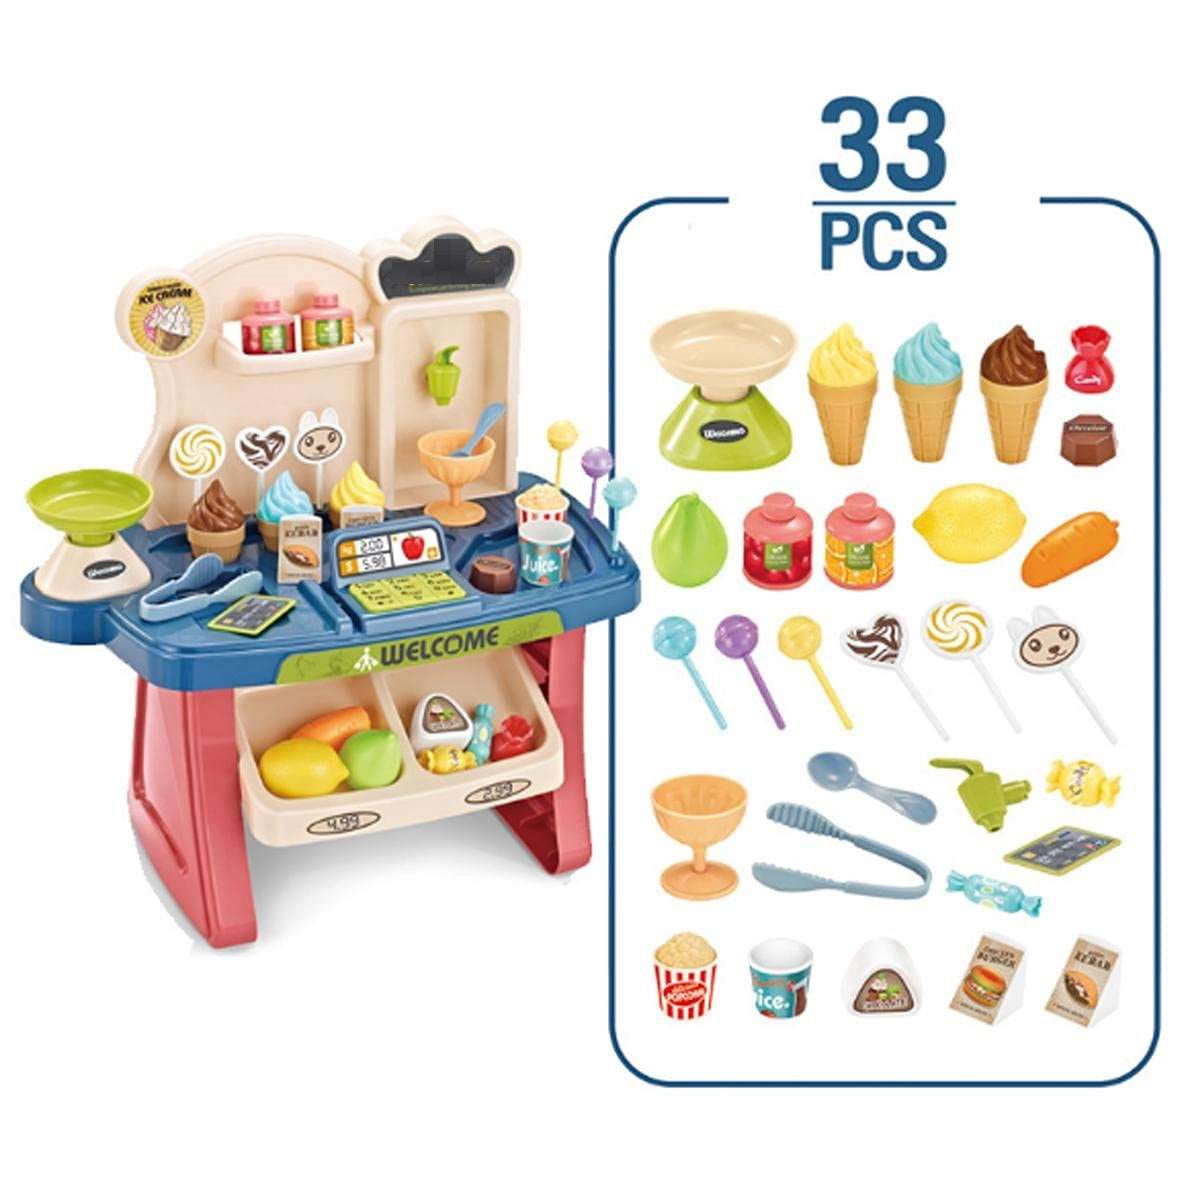 AZi® 33 pcs Children Gift Home Buy Supermarket Cashier Funny Kids Pretend Play Learning Educational Toy with Sound Effects